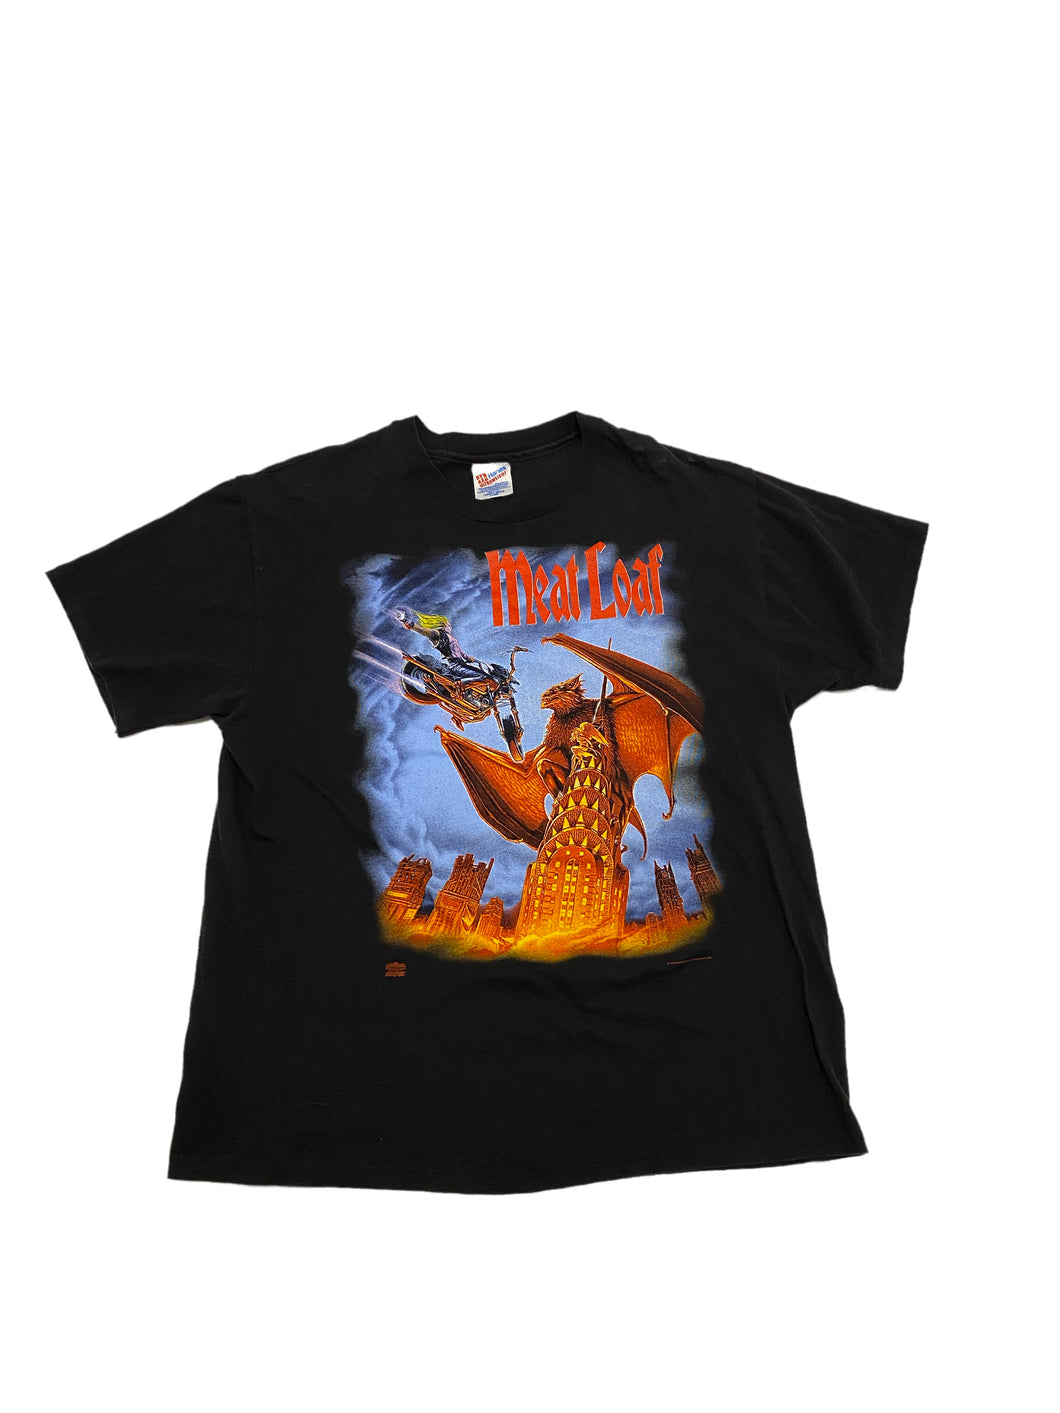 ‘93-‘95 Meatloaf Tour Tee